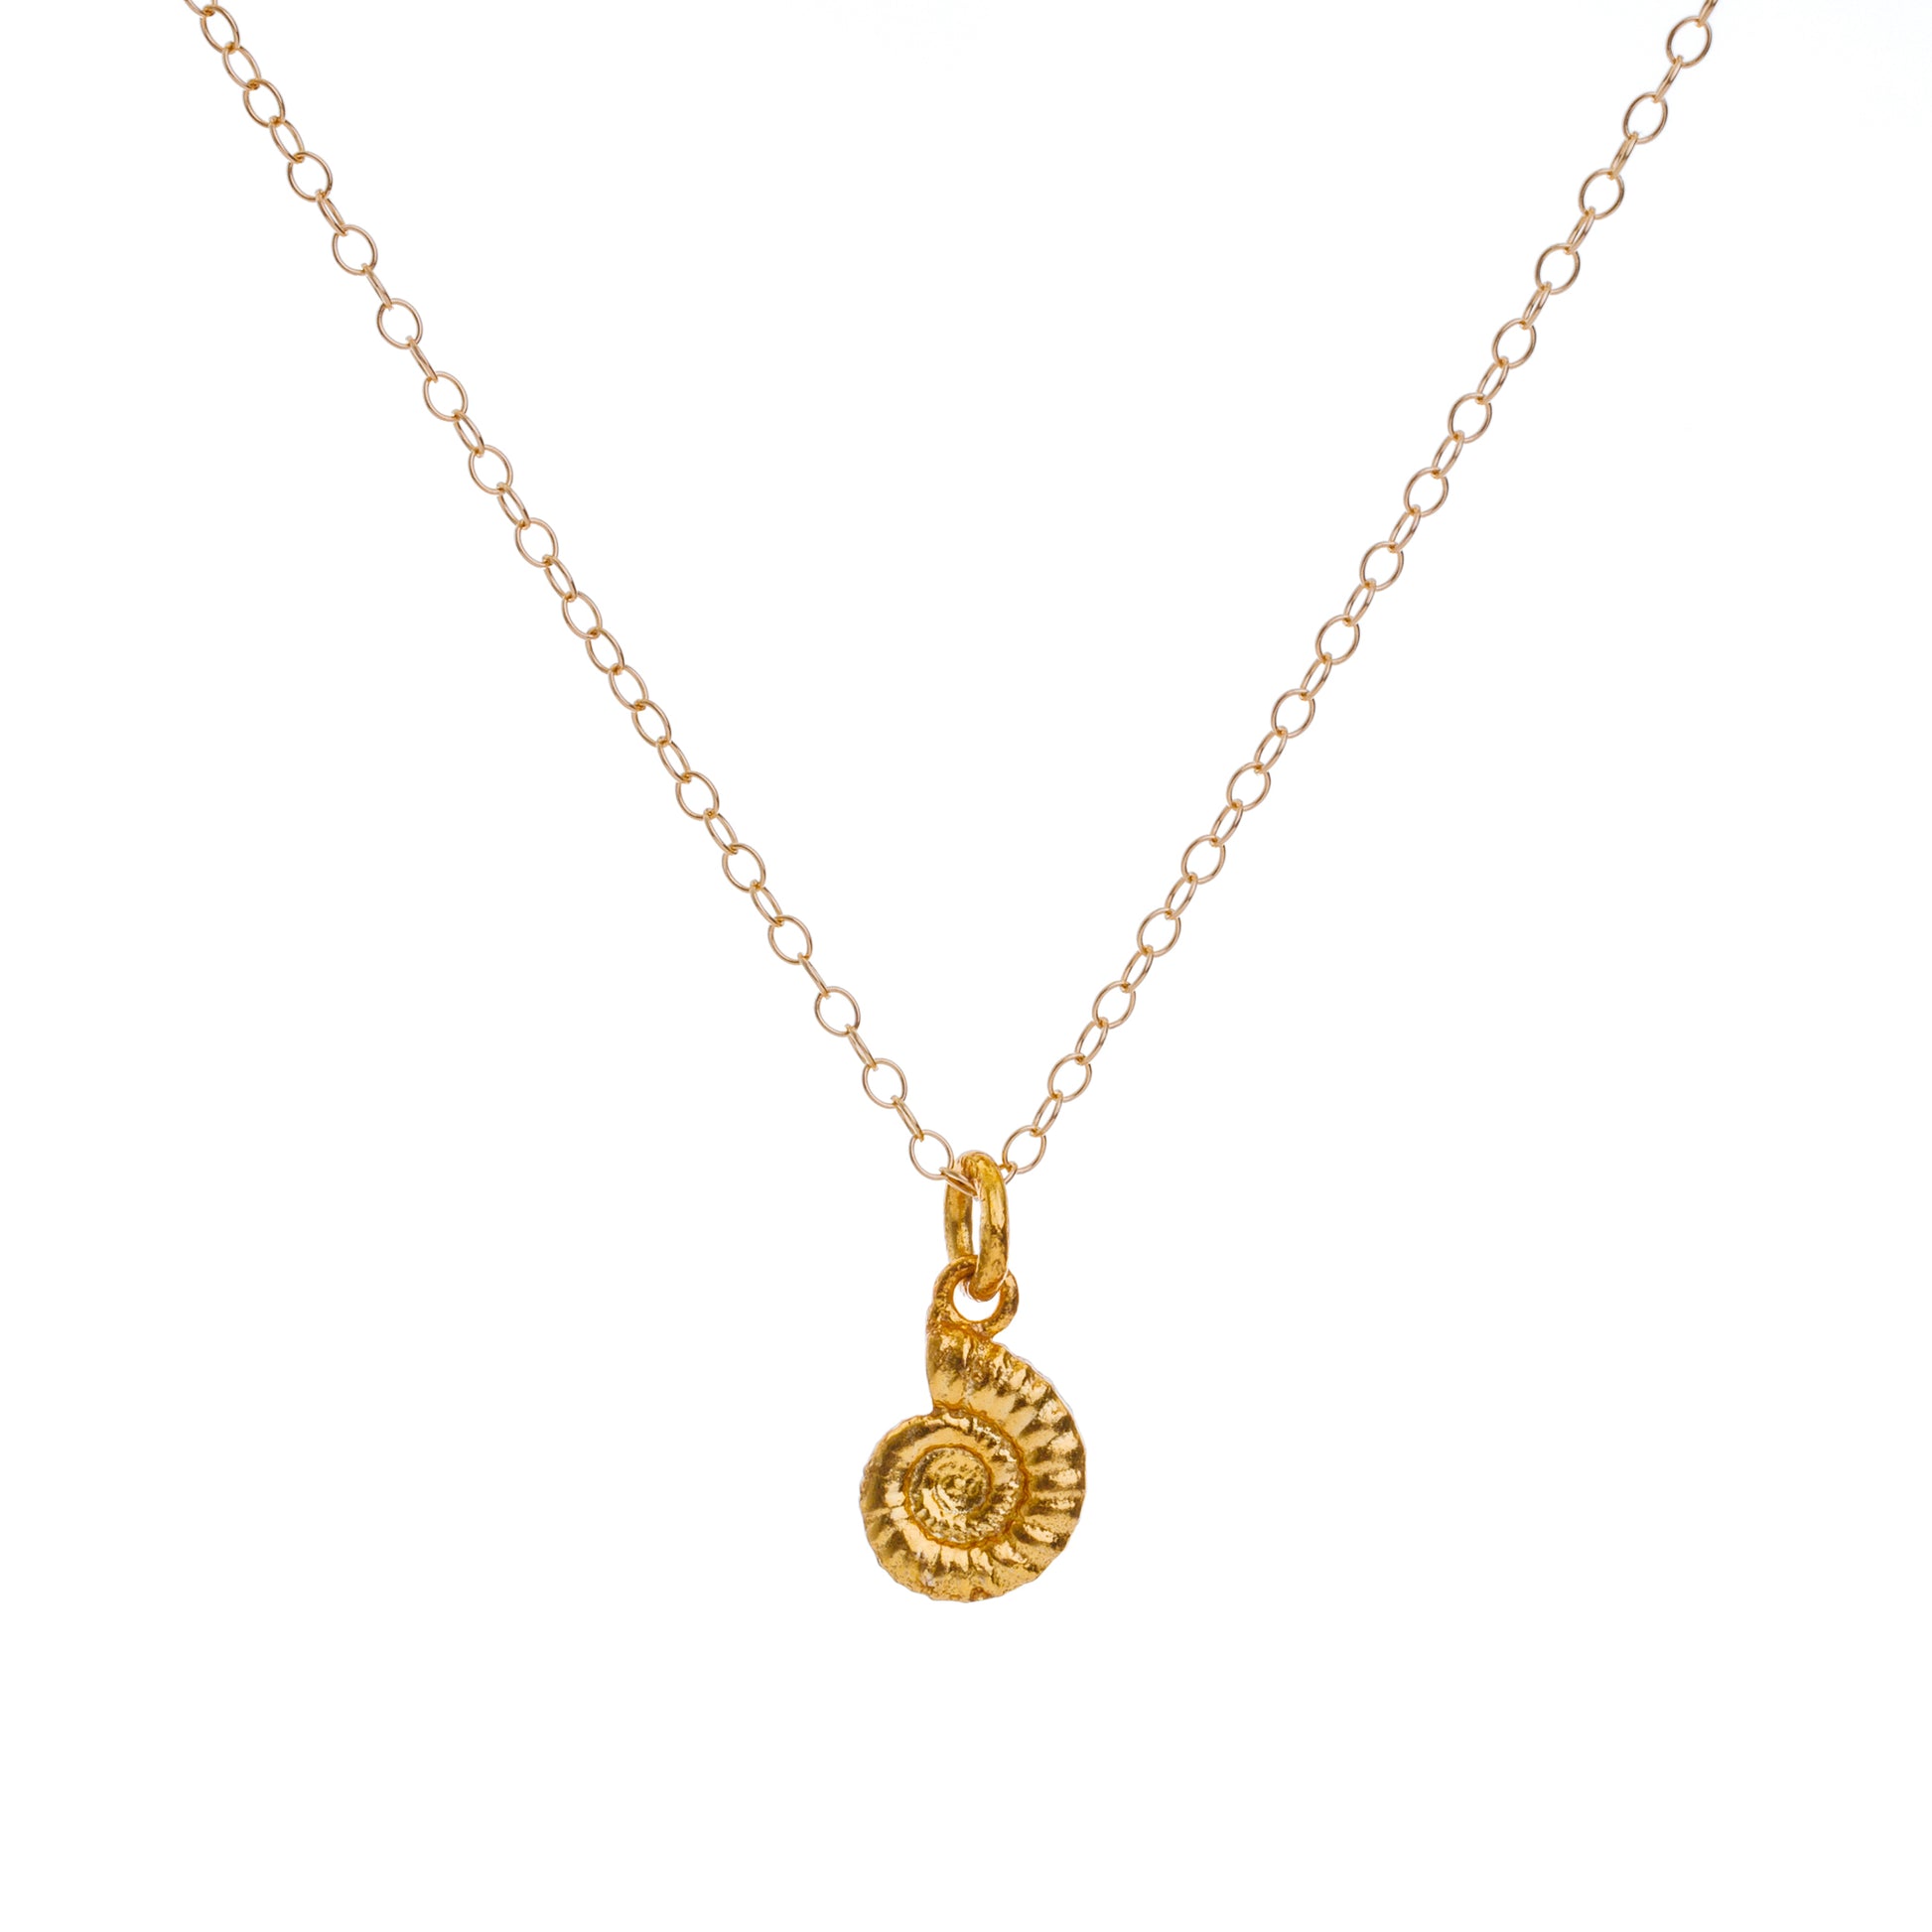 Gold Ammonite Fossil Necklace